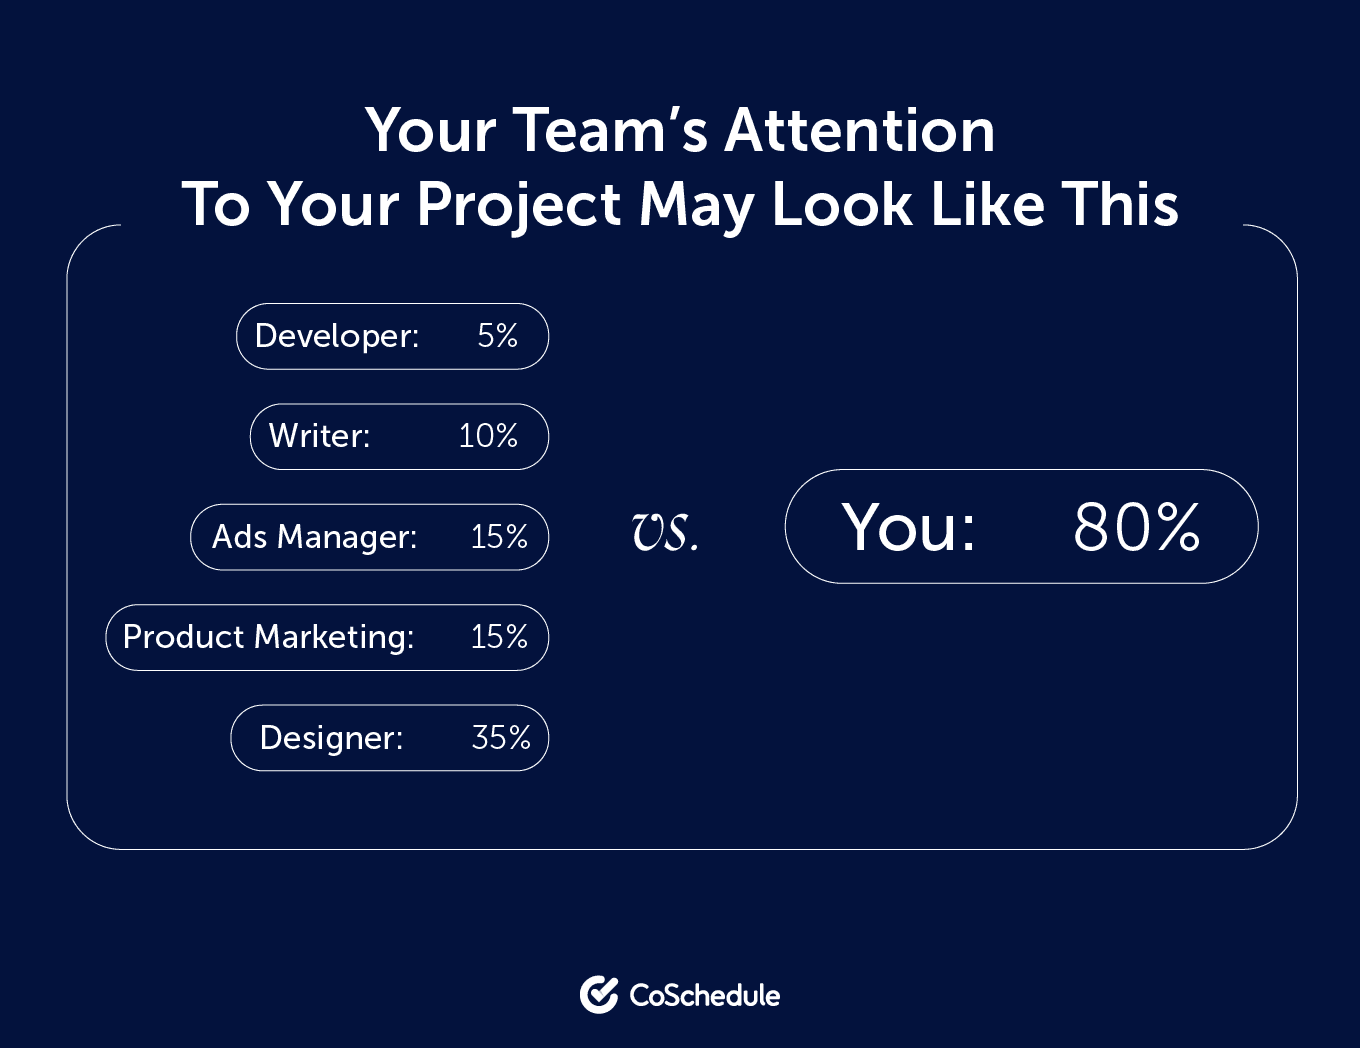 Your team's attention to your project may look like this 